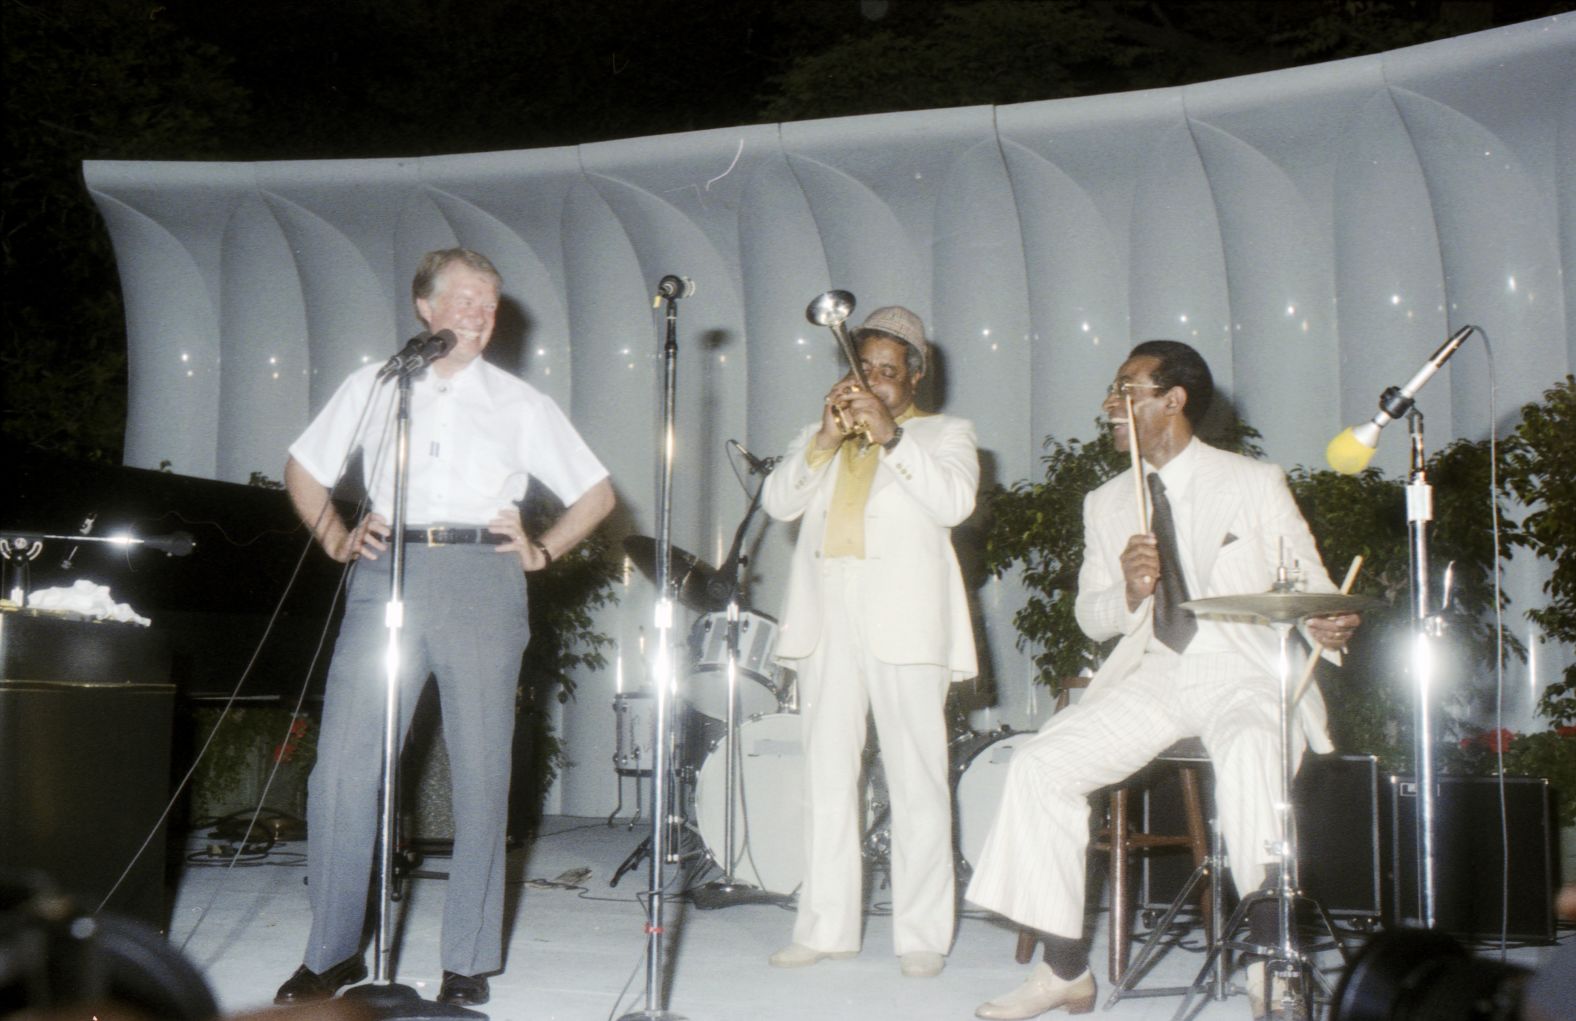 In 1978, President Carter and the first lady hosted a massive jazz festival at the White House -- <a href="index.php?page=&url=https%3A%2F%2Fwww.washingtonpost.com%2Farchive%2Flifestyle%2F1978%2F06%2F19%2Fa-whos-who-of-jazz-on-the-south-lawn%2Fea9ac873-9fd7-41ec-8d9f-110e101ee8df%2F" target="_blank" target="_blank">one Carter introduced as the first of its kind</a>. The event was held in honor of the 25th anniversary of the Newport Jazz Festival, and Carter joined jazz greats Dizzy Gillespie and Max Roach for a performance of "Salt Peanuts." 